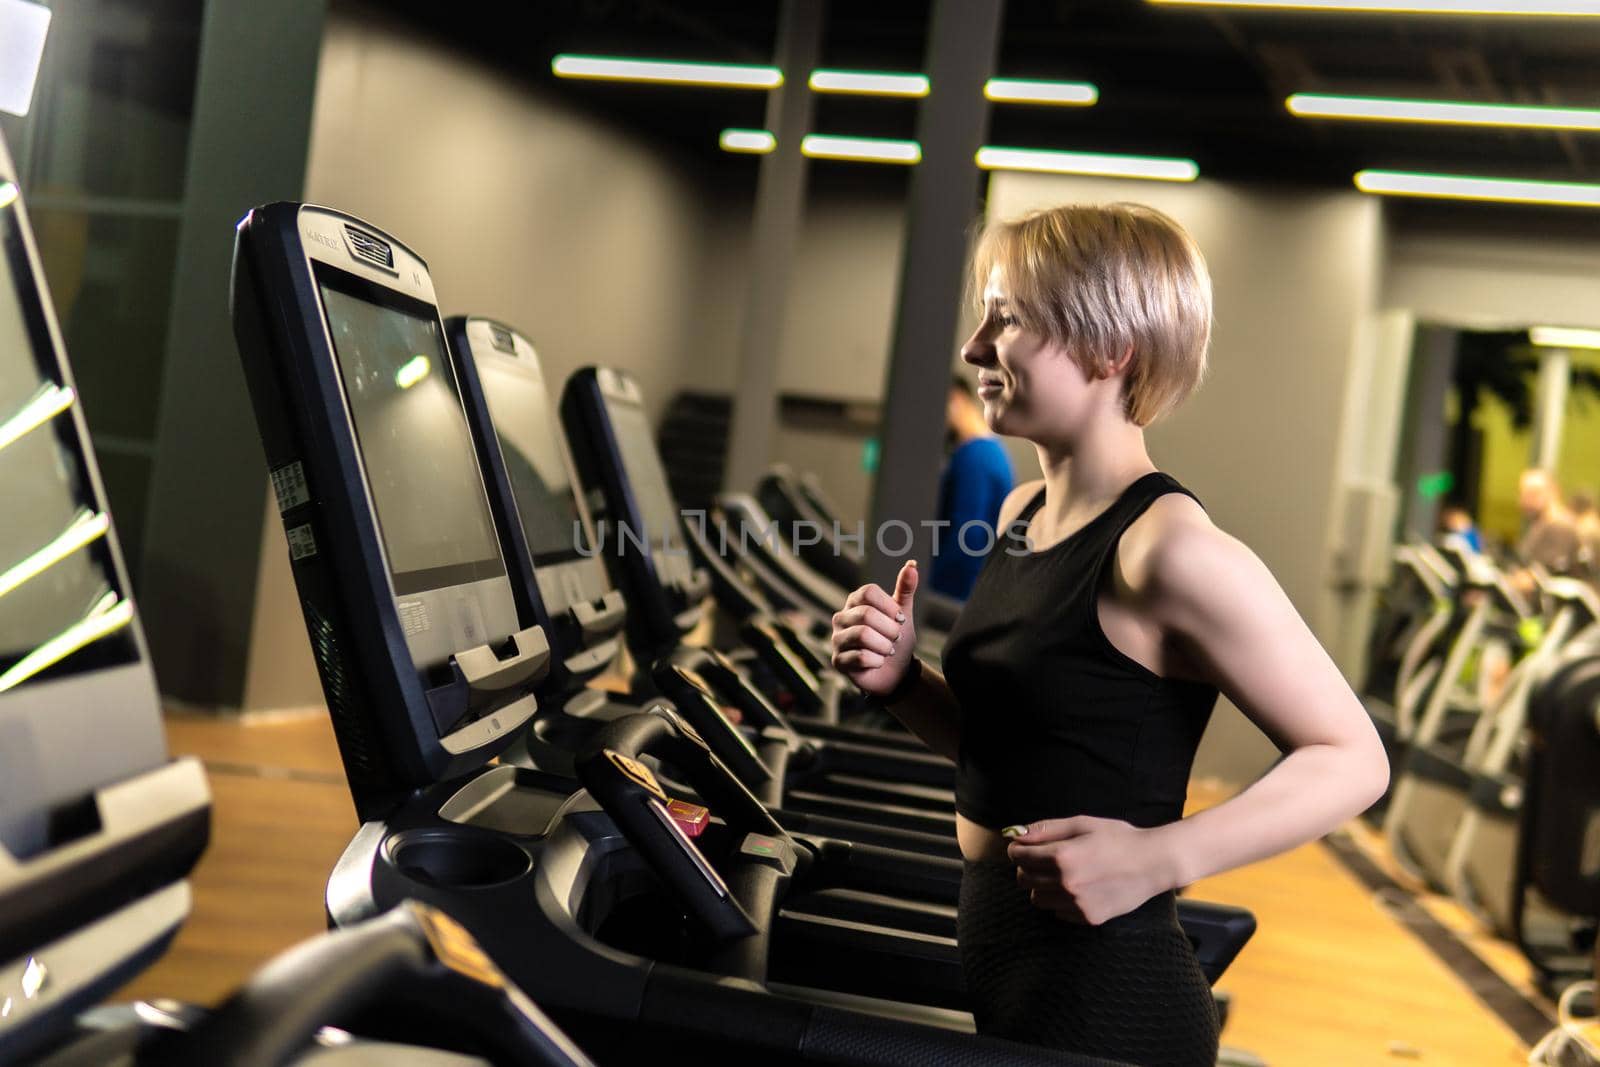 Simulator track workout run activity, in the afternoon exercise healthy in fitness jogging health, machine wellness. Indoor recreation legs, action